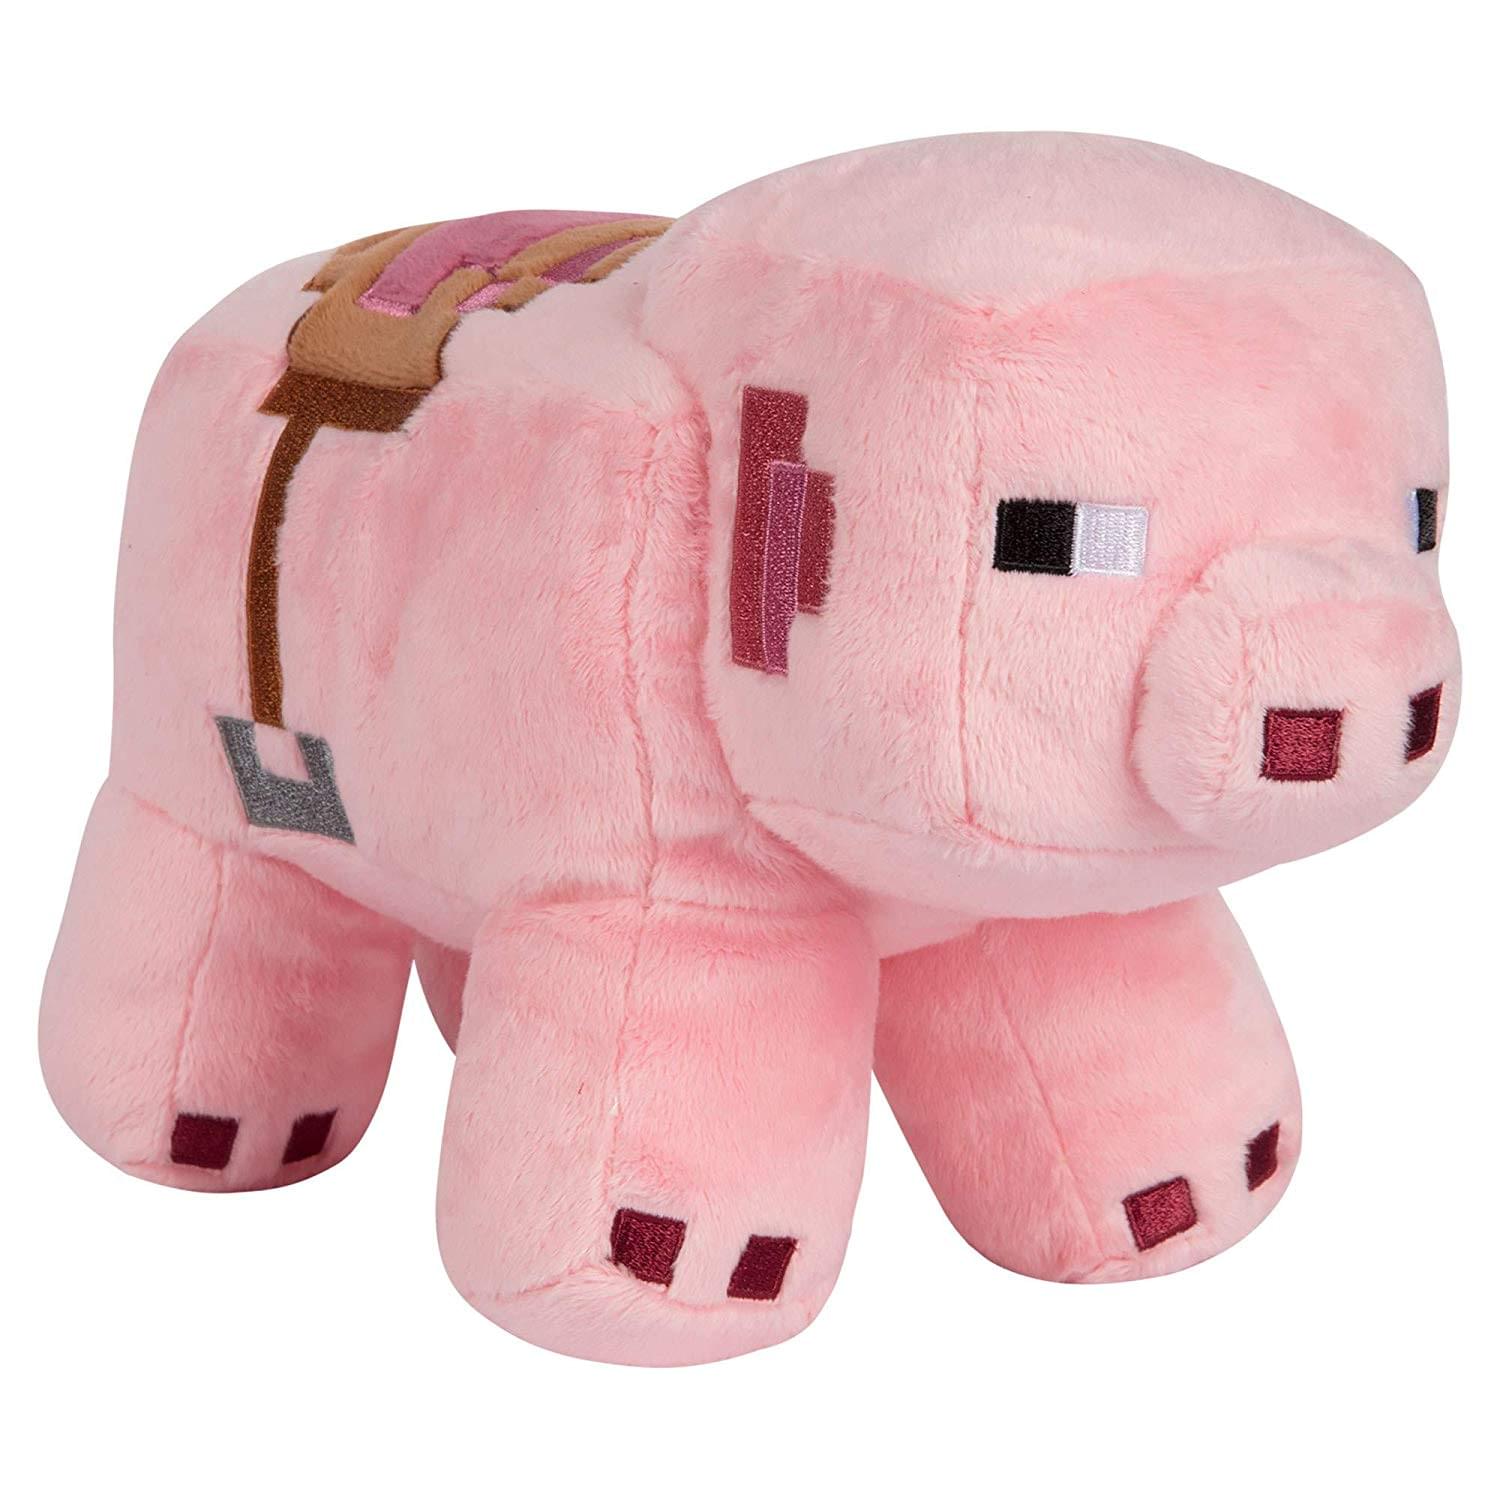 Minecraft Adventure Series 6.5 Inch Collectible Plush Toy - Saddled Pig